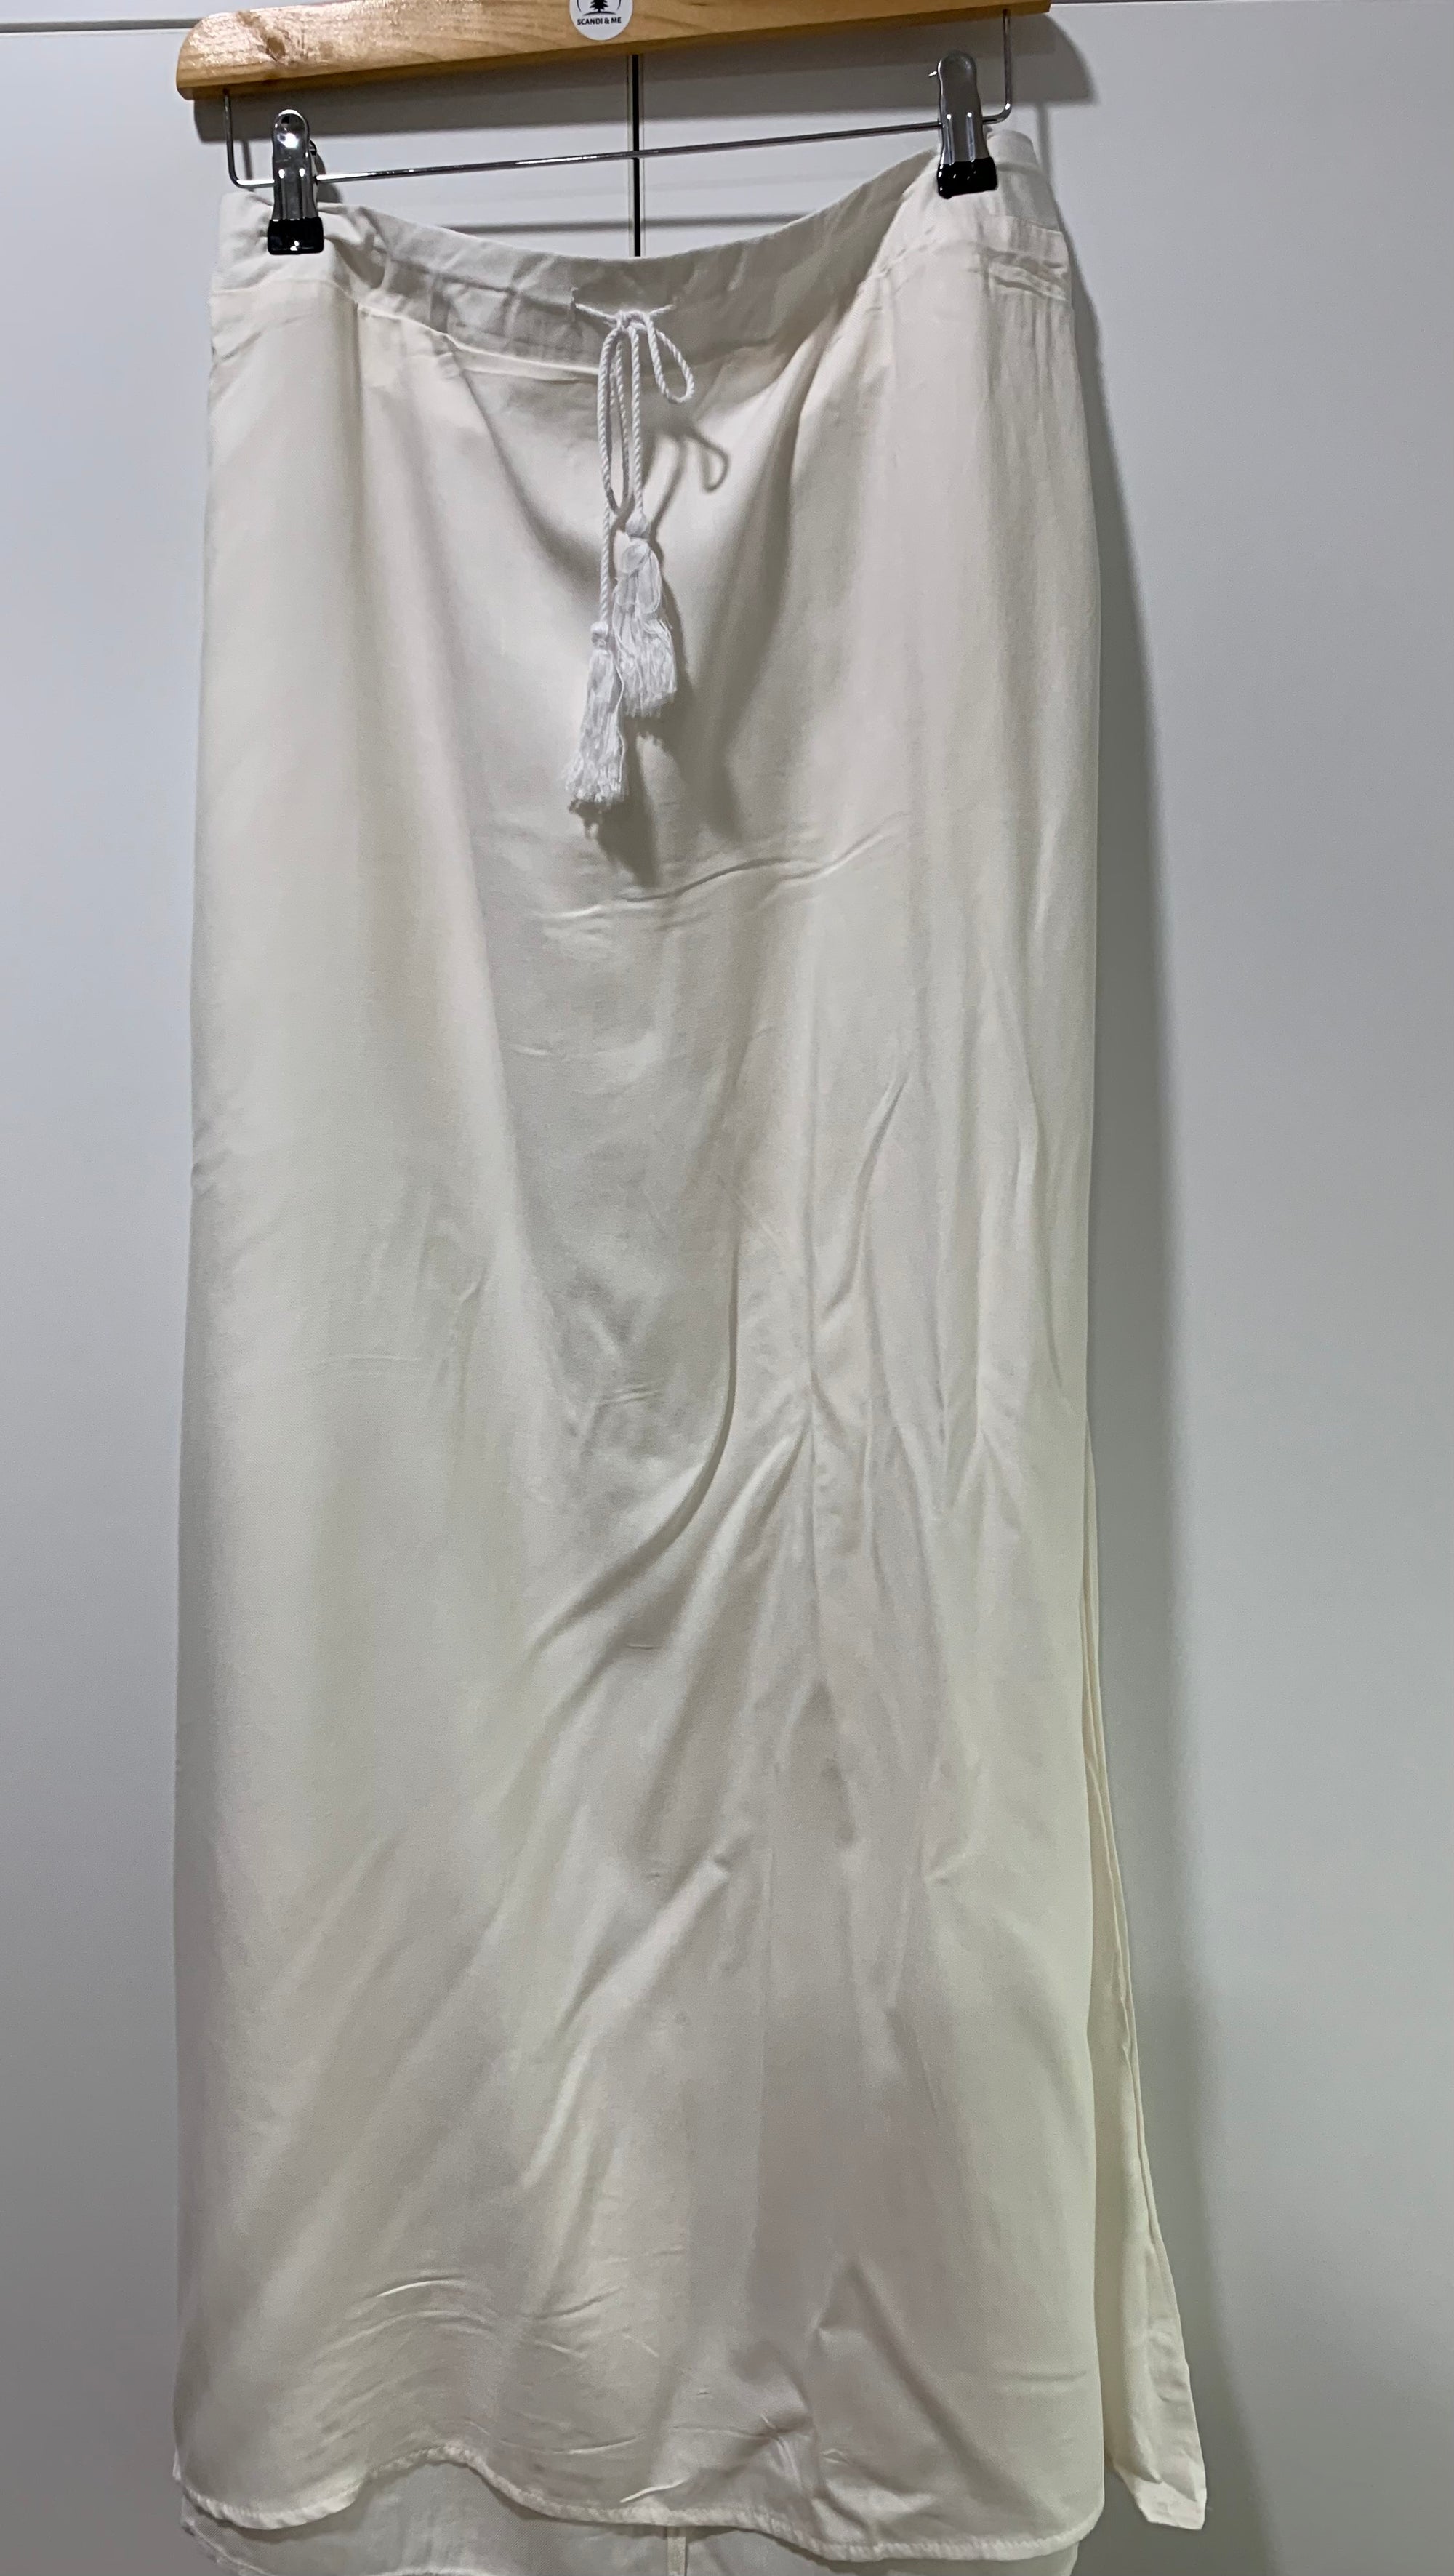 Maxi Skirt in Super White on White with Drawstring Waist Flattering Fall